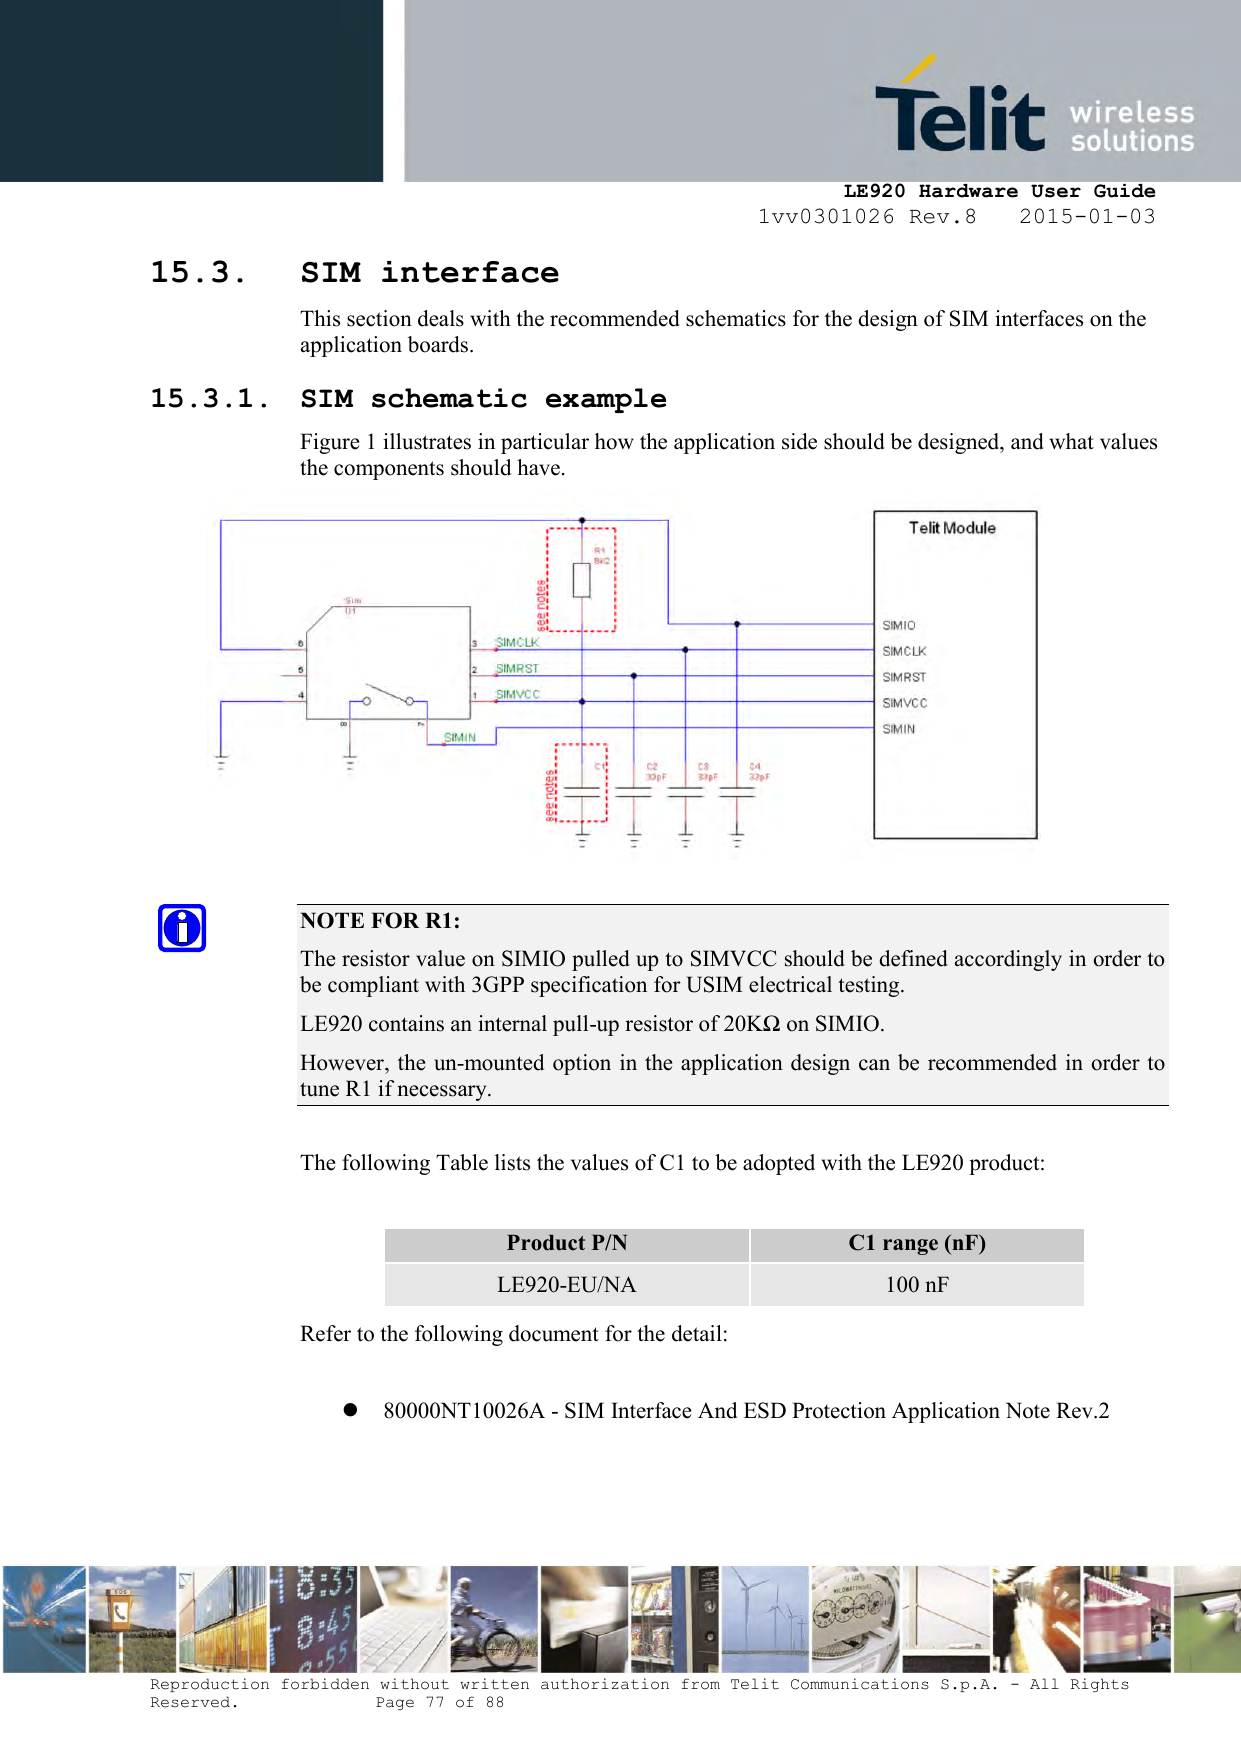     LE920 Hardware User Guide 1vv0301026 Rev.8   2015-01-03 Reproduction forbidden without written authorization from Telit Communications S.p.A. - All Rights Reserved.    Page 77 of 88  15.3. SIM interface This section deals with the recommended schematics for the design of SIM interfaces on the application boards. 15.3.1. SIM schematic example Figure 1 illustrates in particular how the application side should be designed, and what values the components should have.   NOTE FOR R1: The resistor value on SIMIO pulled up to SIMVCC should be defined accordingly in order to be compliant with 3GPP specification for USIM electrical testing. LE920 contains an internal pull-up resistor of 20KΩ on SIMIO. However, the un-mounted option in the application design can be recommended in order to tune R1 if necessary.   The following Table lists the values of C1 to be adopted with the LE920 product:  Product P/N C1 range (nF) LE920-EU/NA 100 nF Refer to the following document for the detail:   80000NT10026A - SIM Interface And ESD Protection Application Note Rev.2    